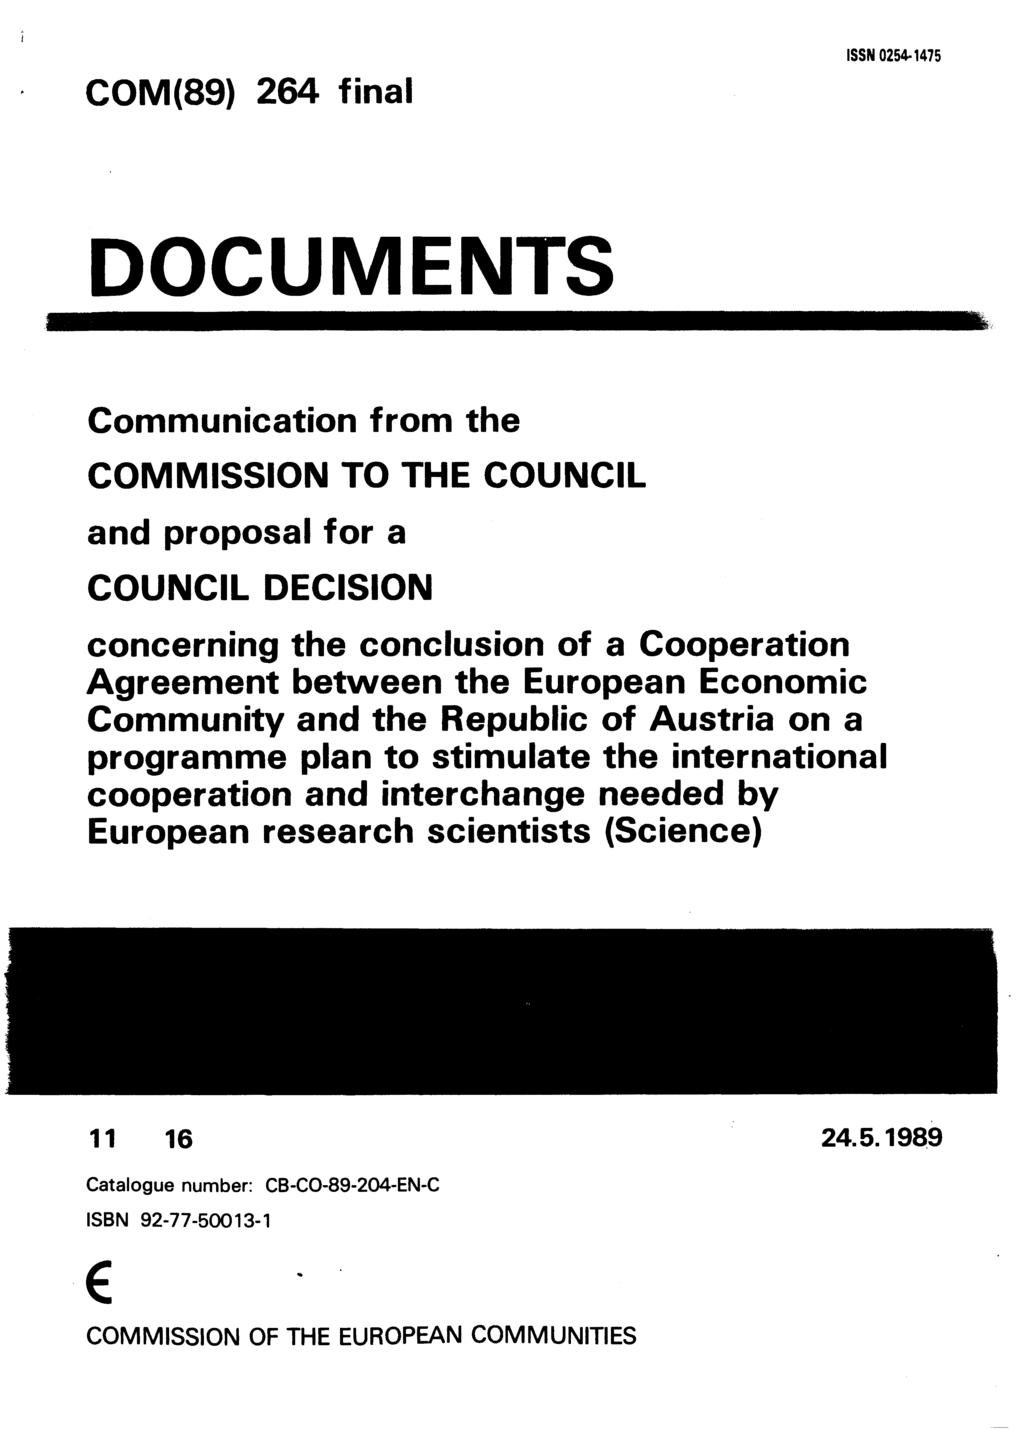 COM(89) 264 final ISSN 0254-1475 DOCUMENTS Communication from the COMMISSION TO THE COUNCIL and proposal for a COUNCIL DECISION concerning the conclusion of a Cooperation Agreement between the